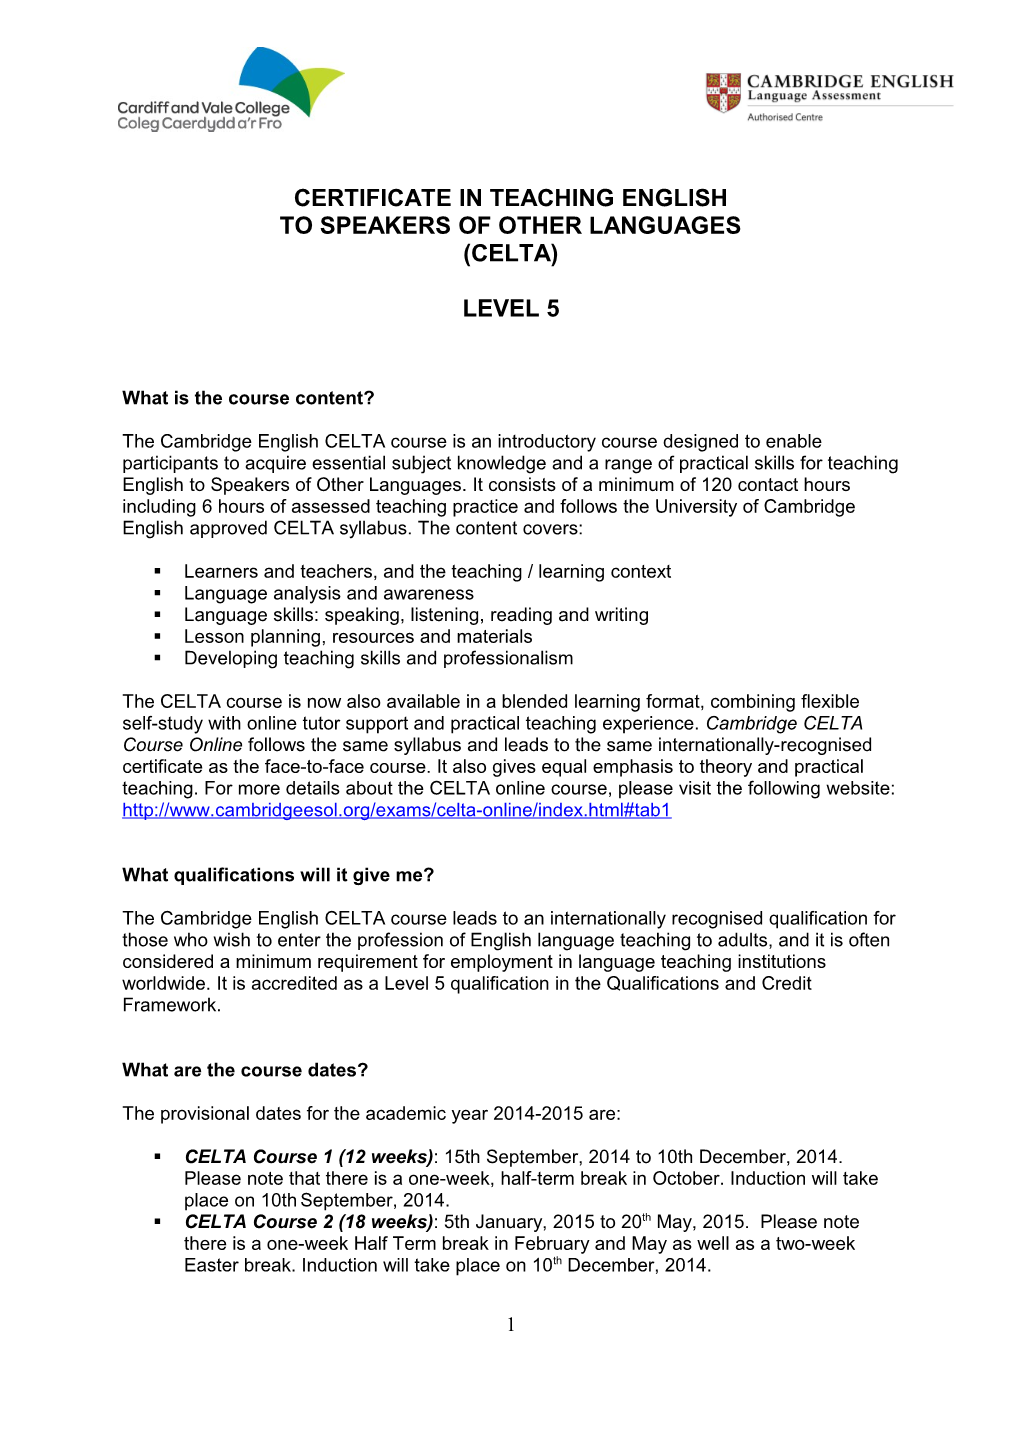 Certificate in Teaching English to Speakers of Other Languages